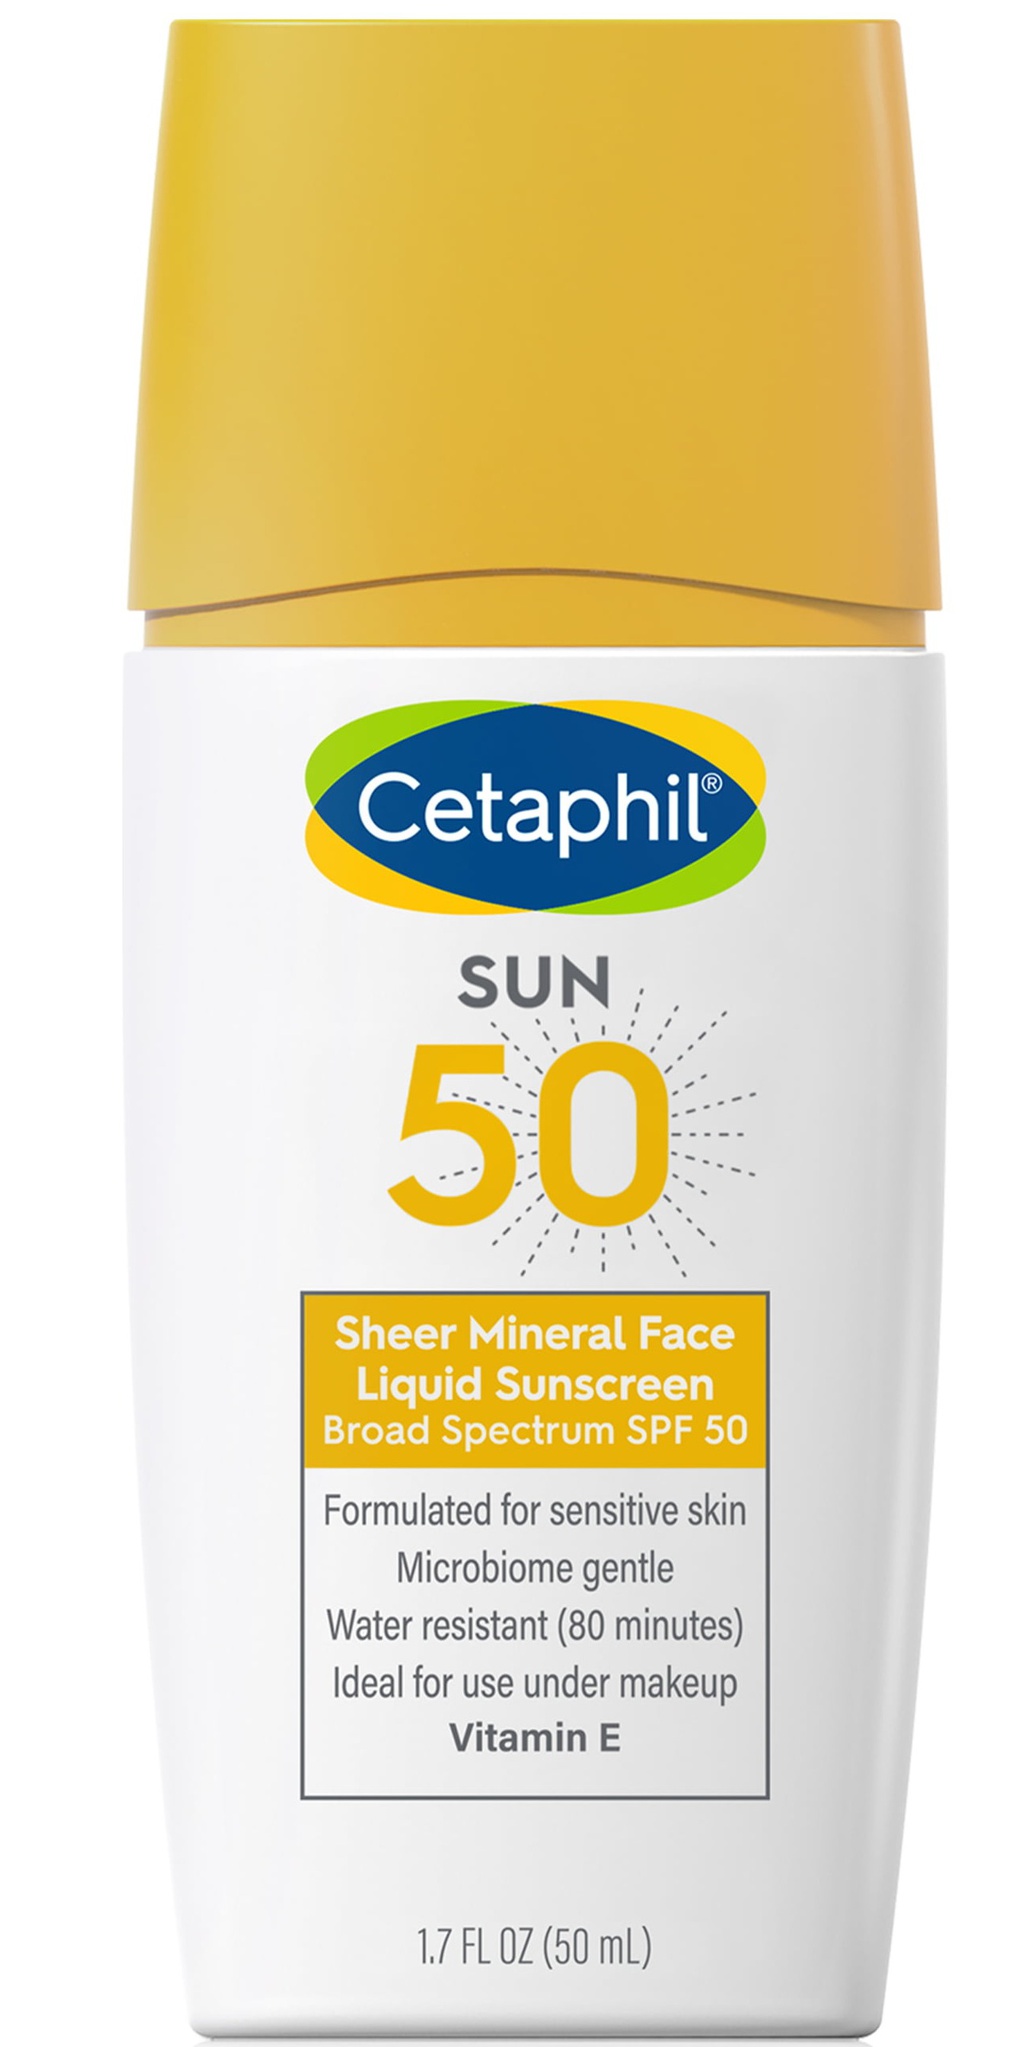 Cetaphil Sheer 100% Mineral Liquid Sunscreen For Face With Zinc Oxide Broad Spectrum SPF 50 Formulated For Sensitive Skin